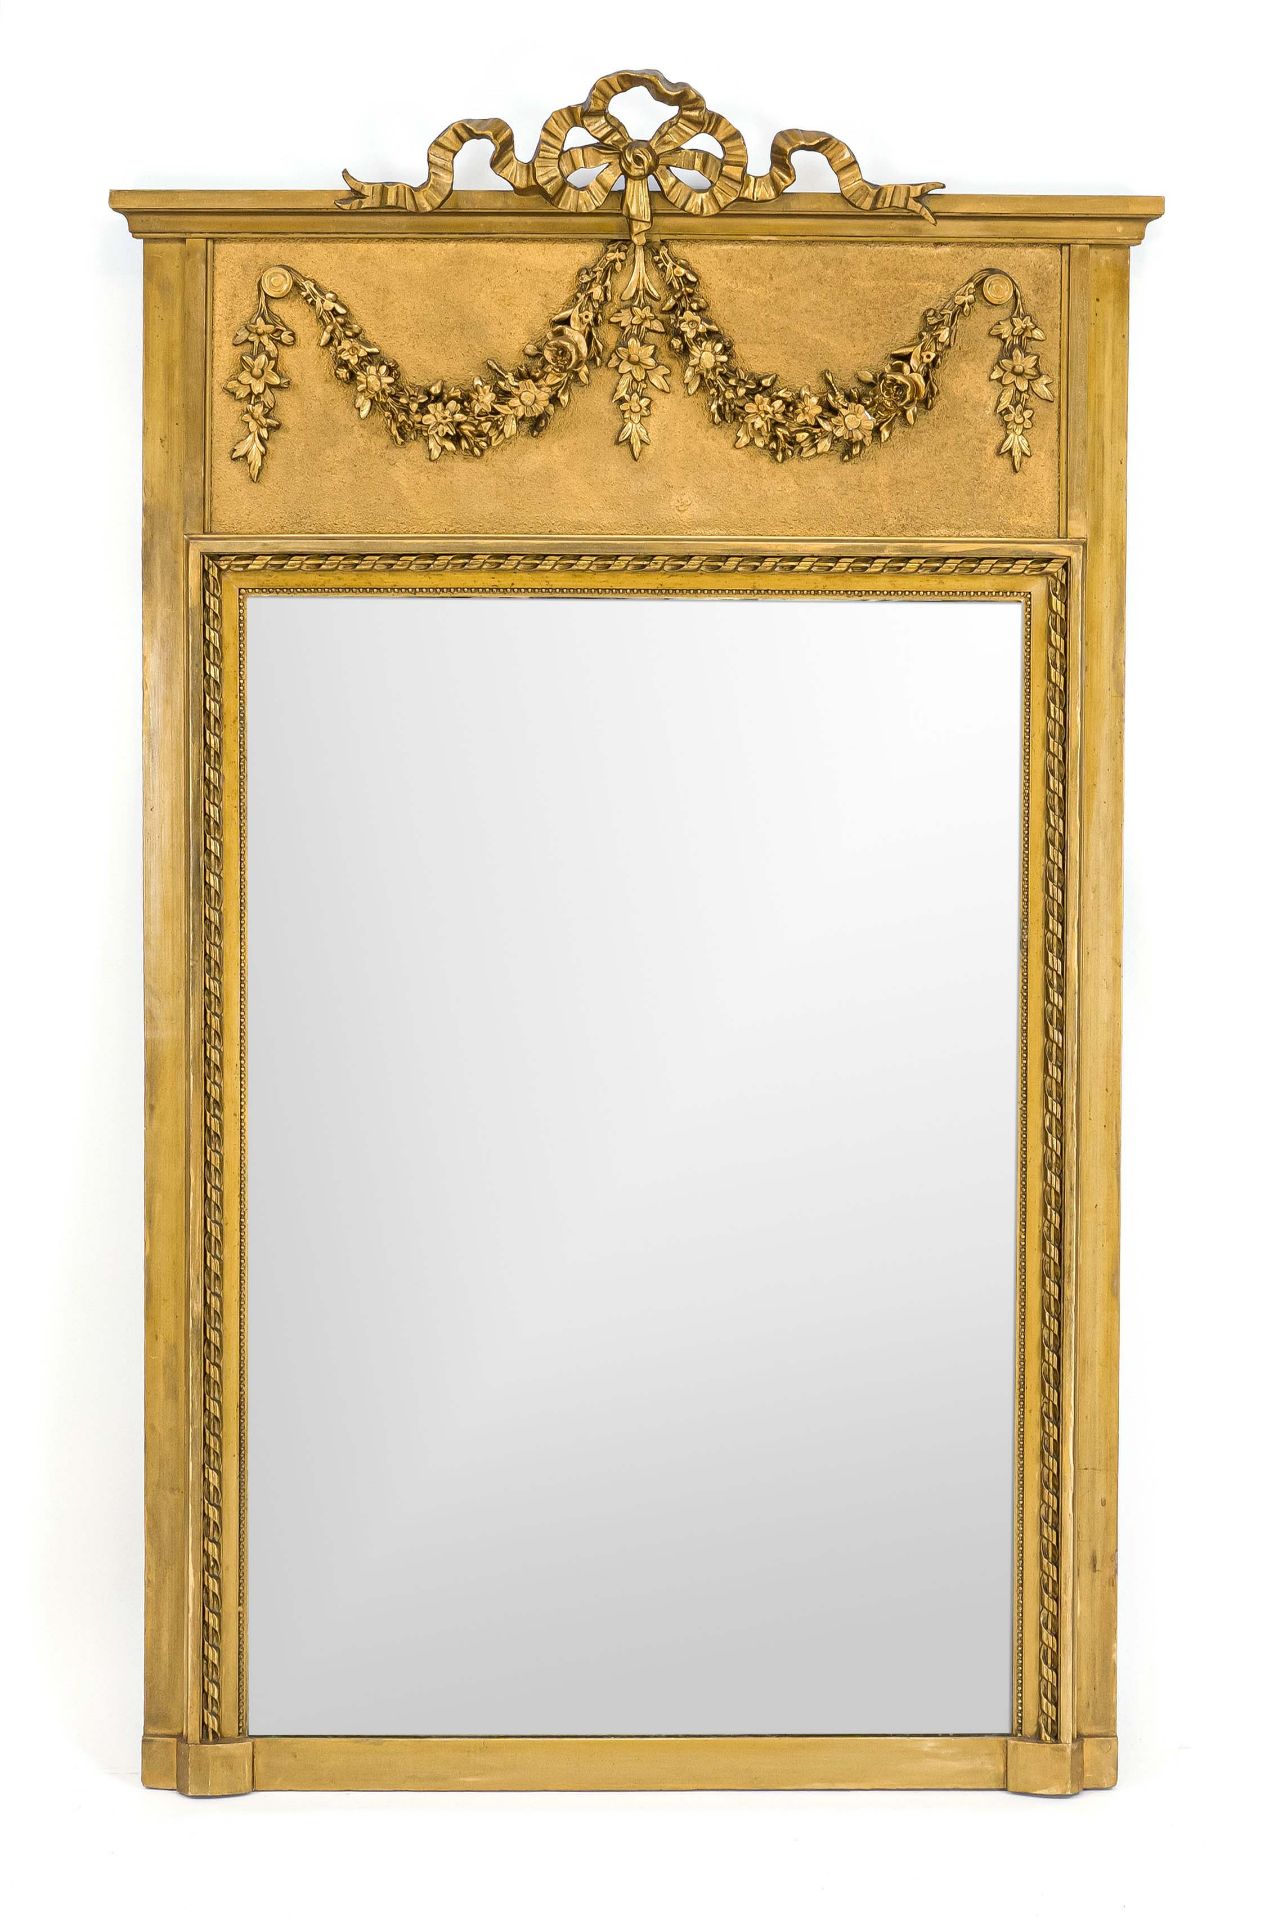 Wall mirror from around 1900, gold-bronzed wood, stucco festoons, 133 x 79 cm